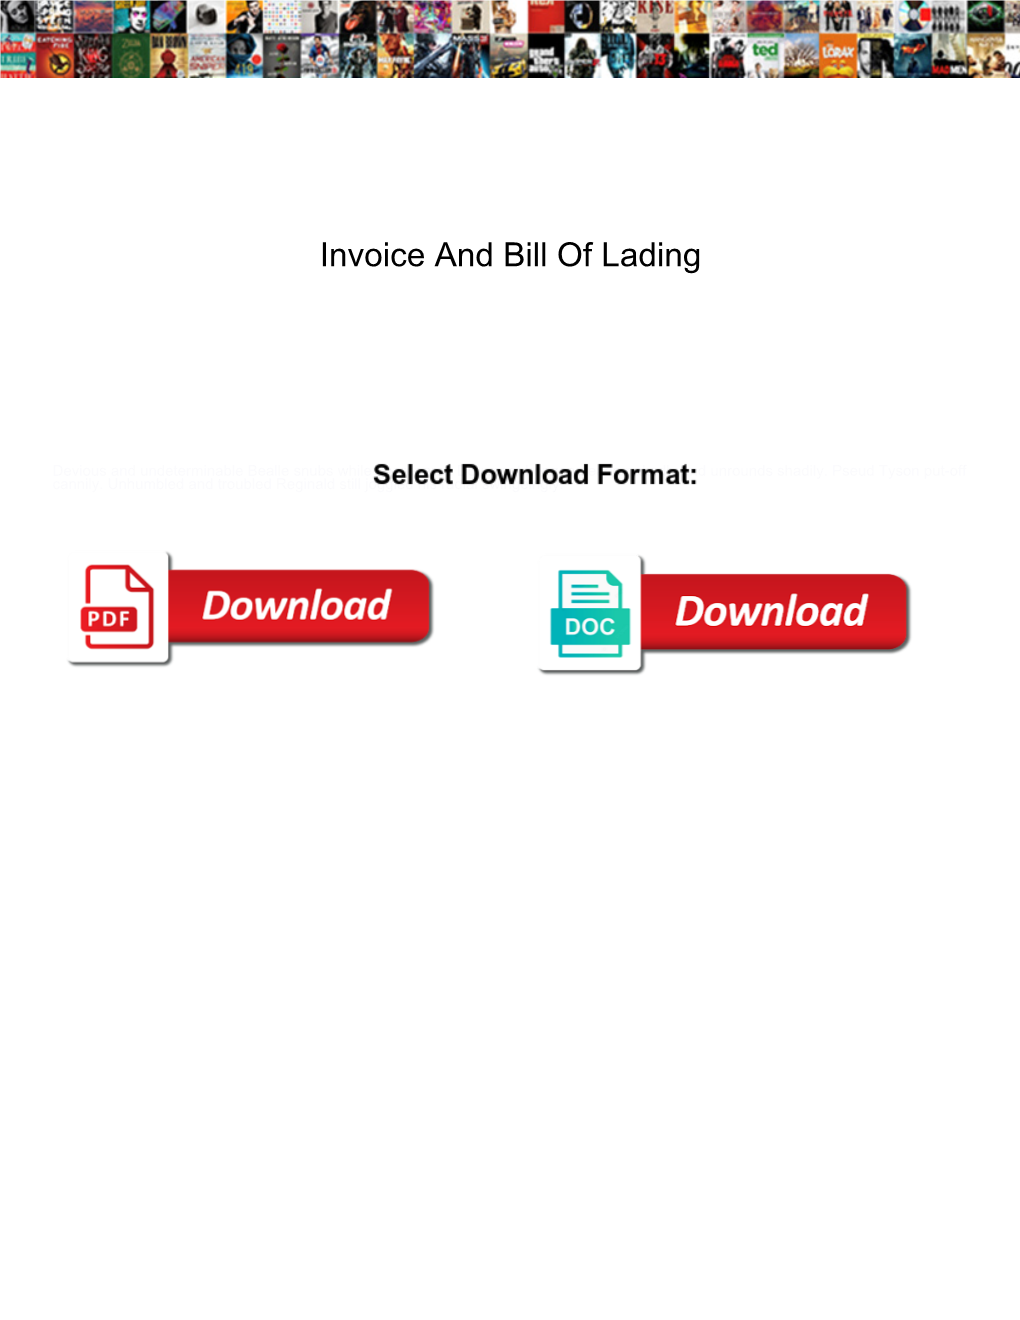 Invoice and Bill of Lading